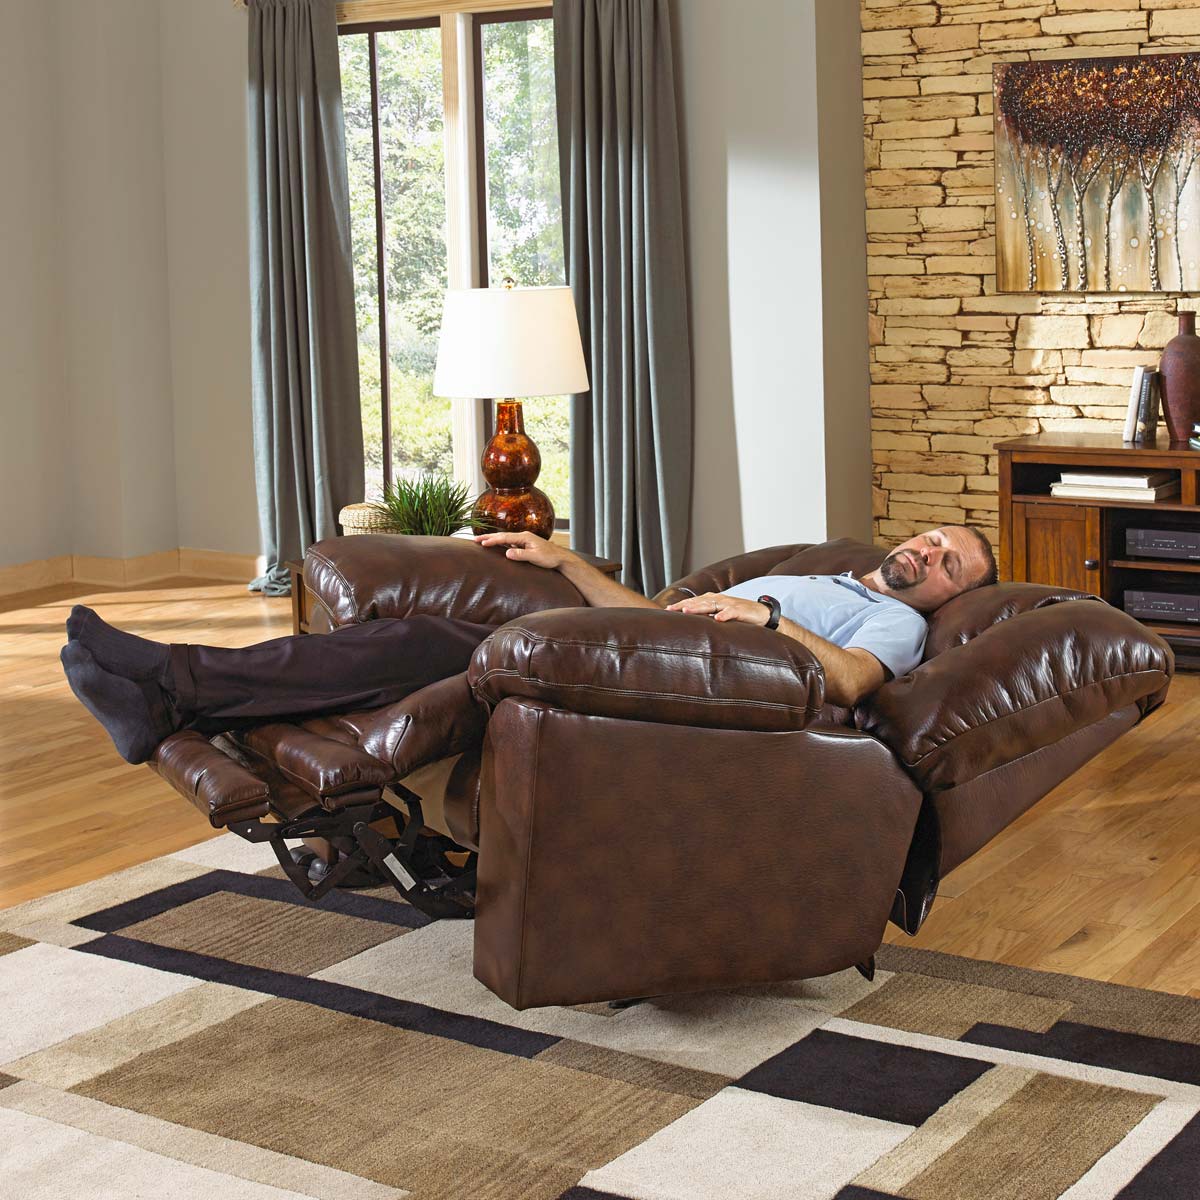 CatNapper Foster Bonded Leather Power Lay Flat Recliner with X-tra Comfort Footrest - Havana